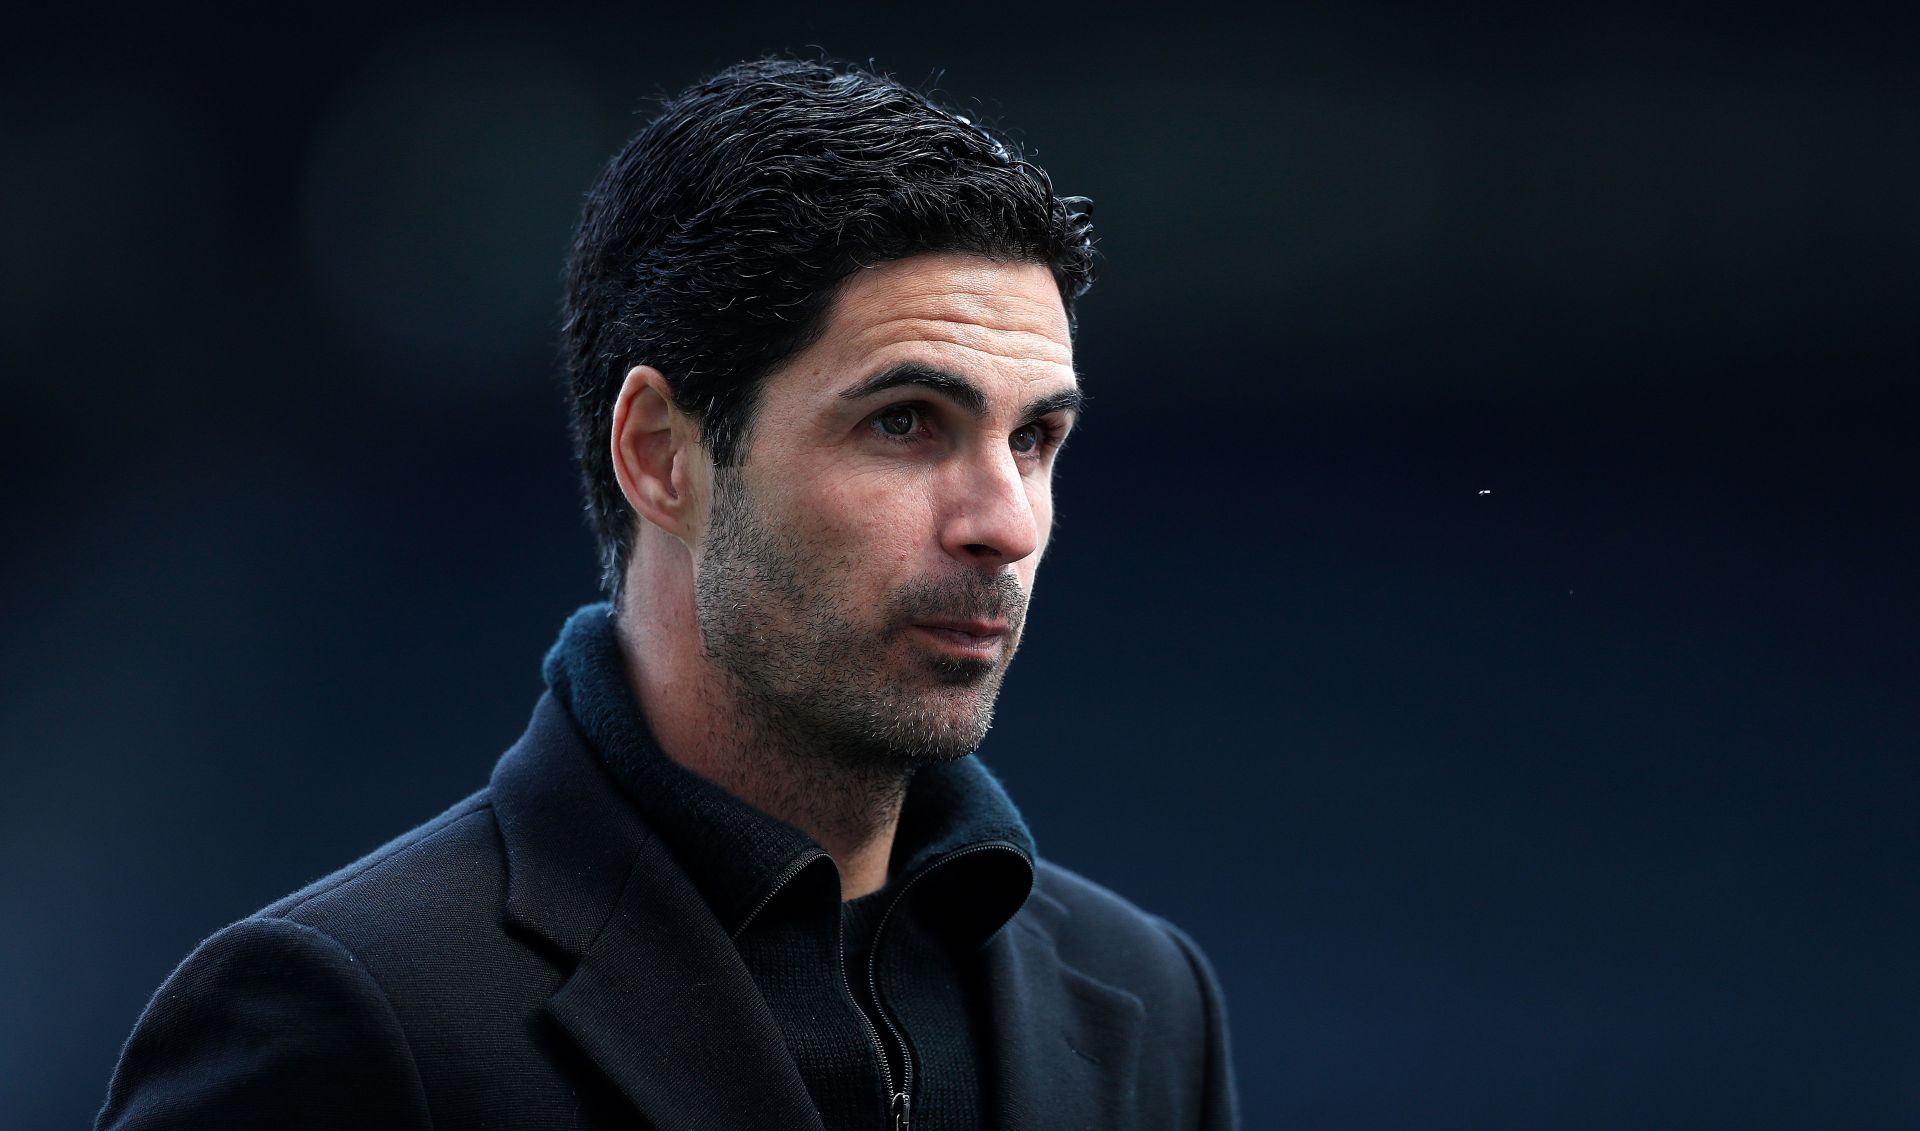 Mikel Arteta will fancy a positive result against Liverpool.